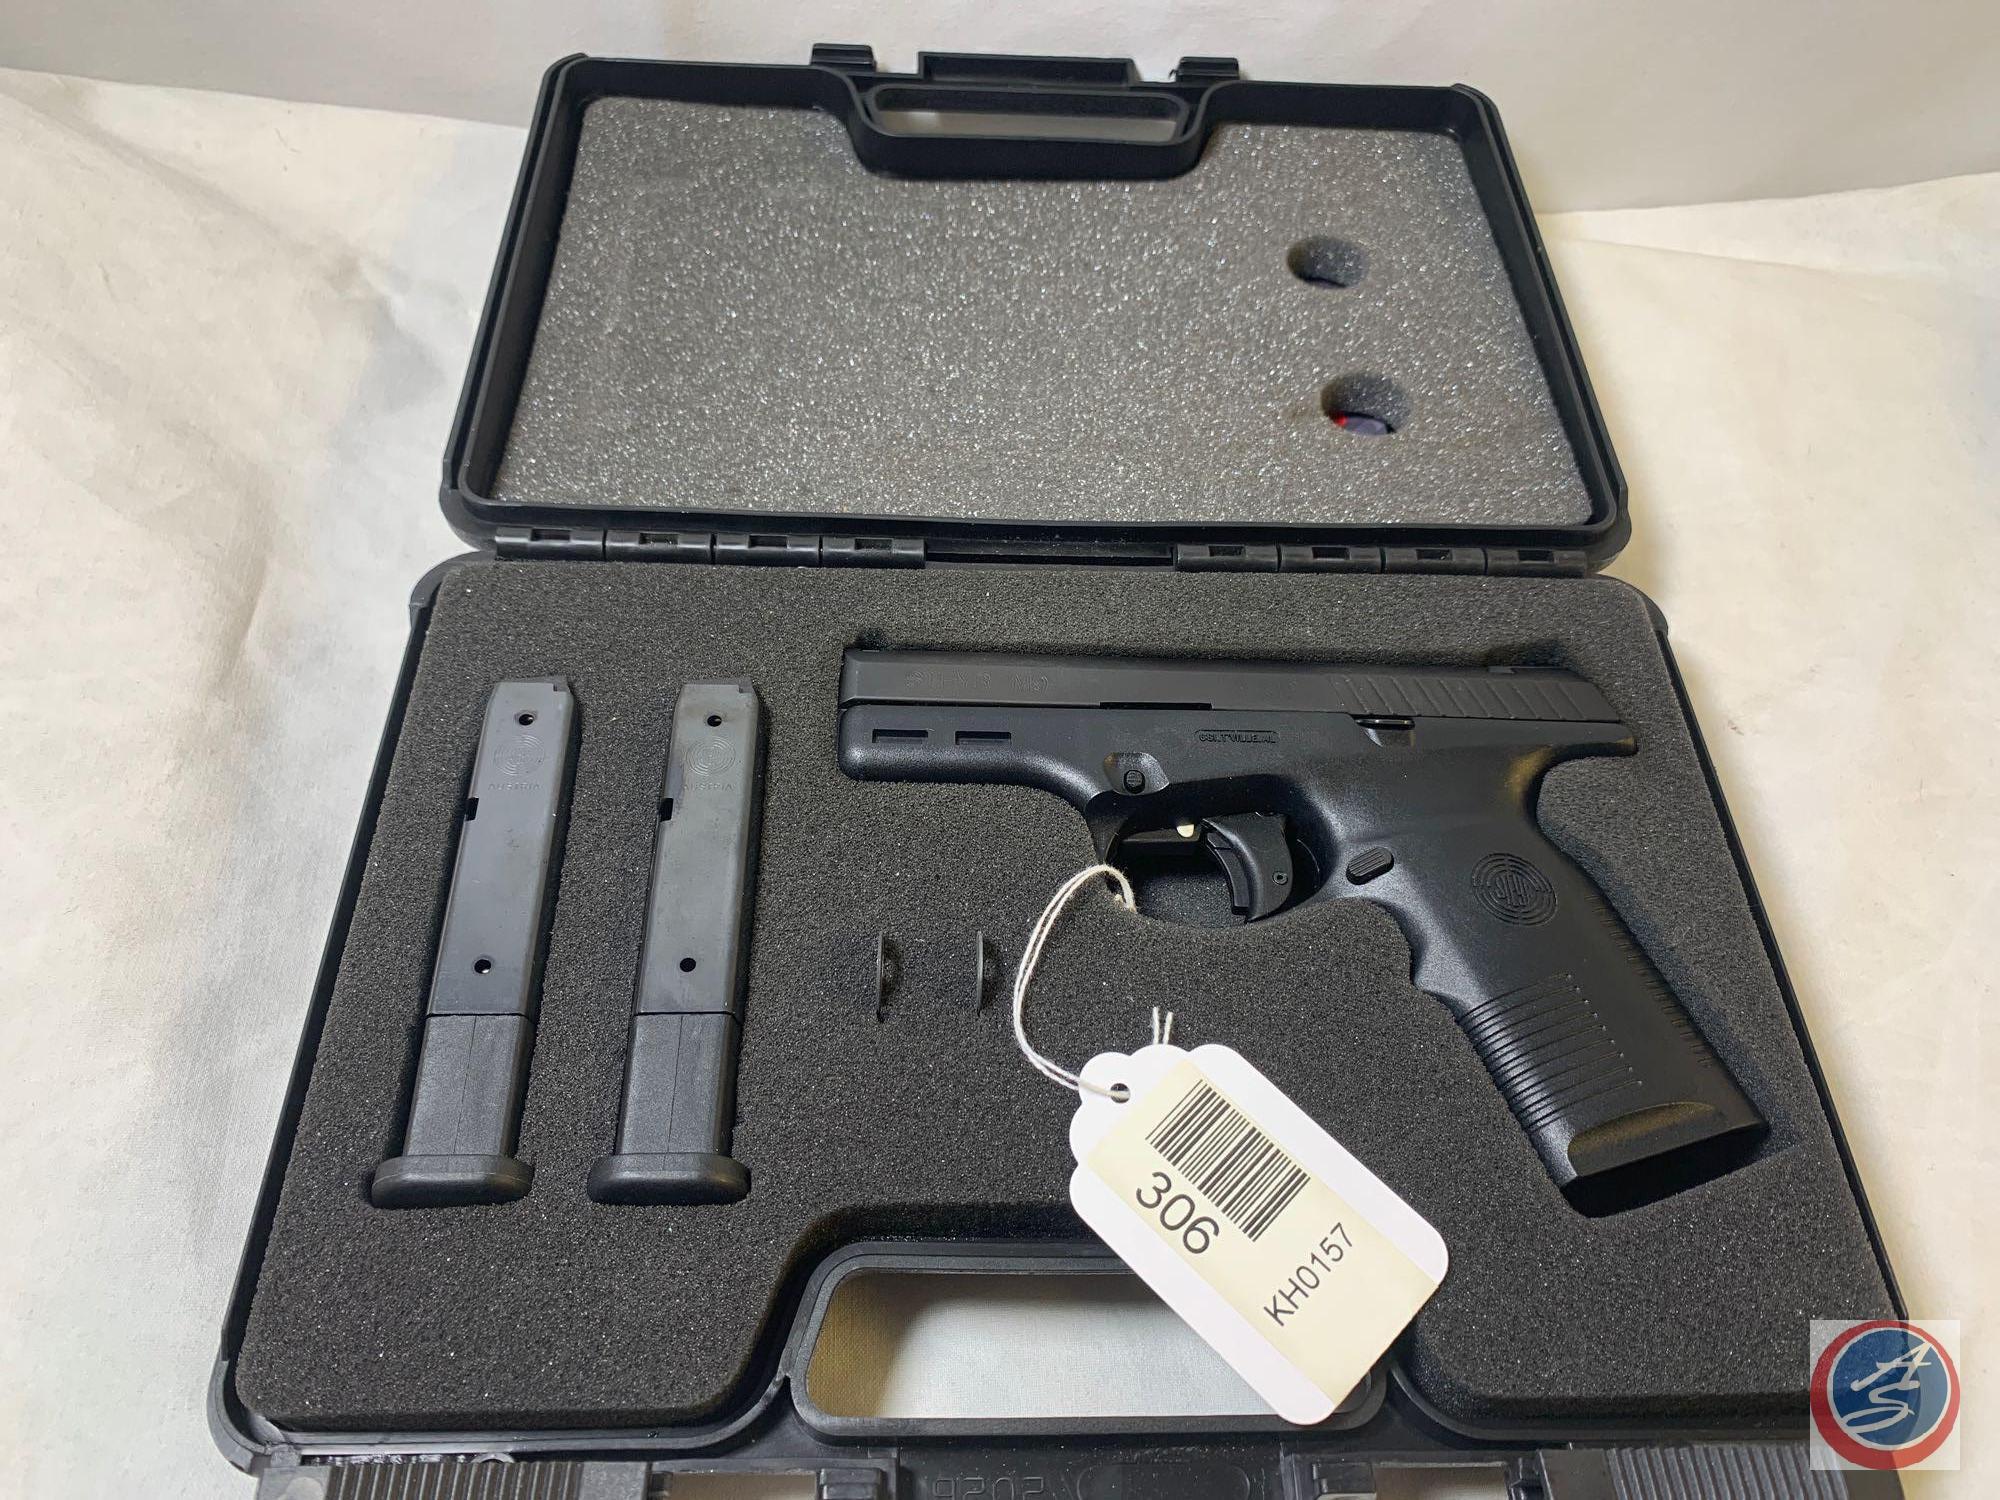 Steyr Manlincher Model M9 9 X19 Pistol Semi-Auto Pistol as new in factory case with 2 magazines